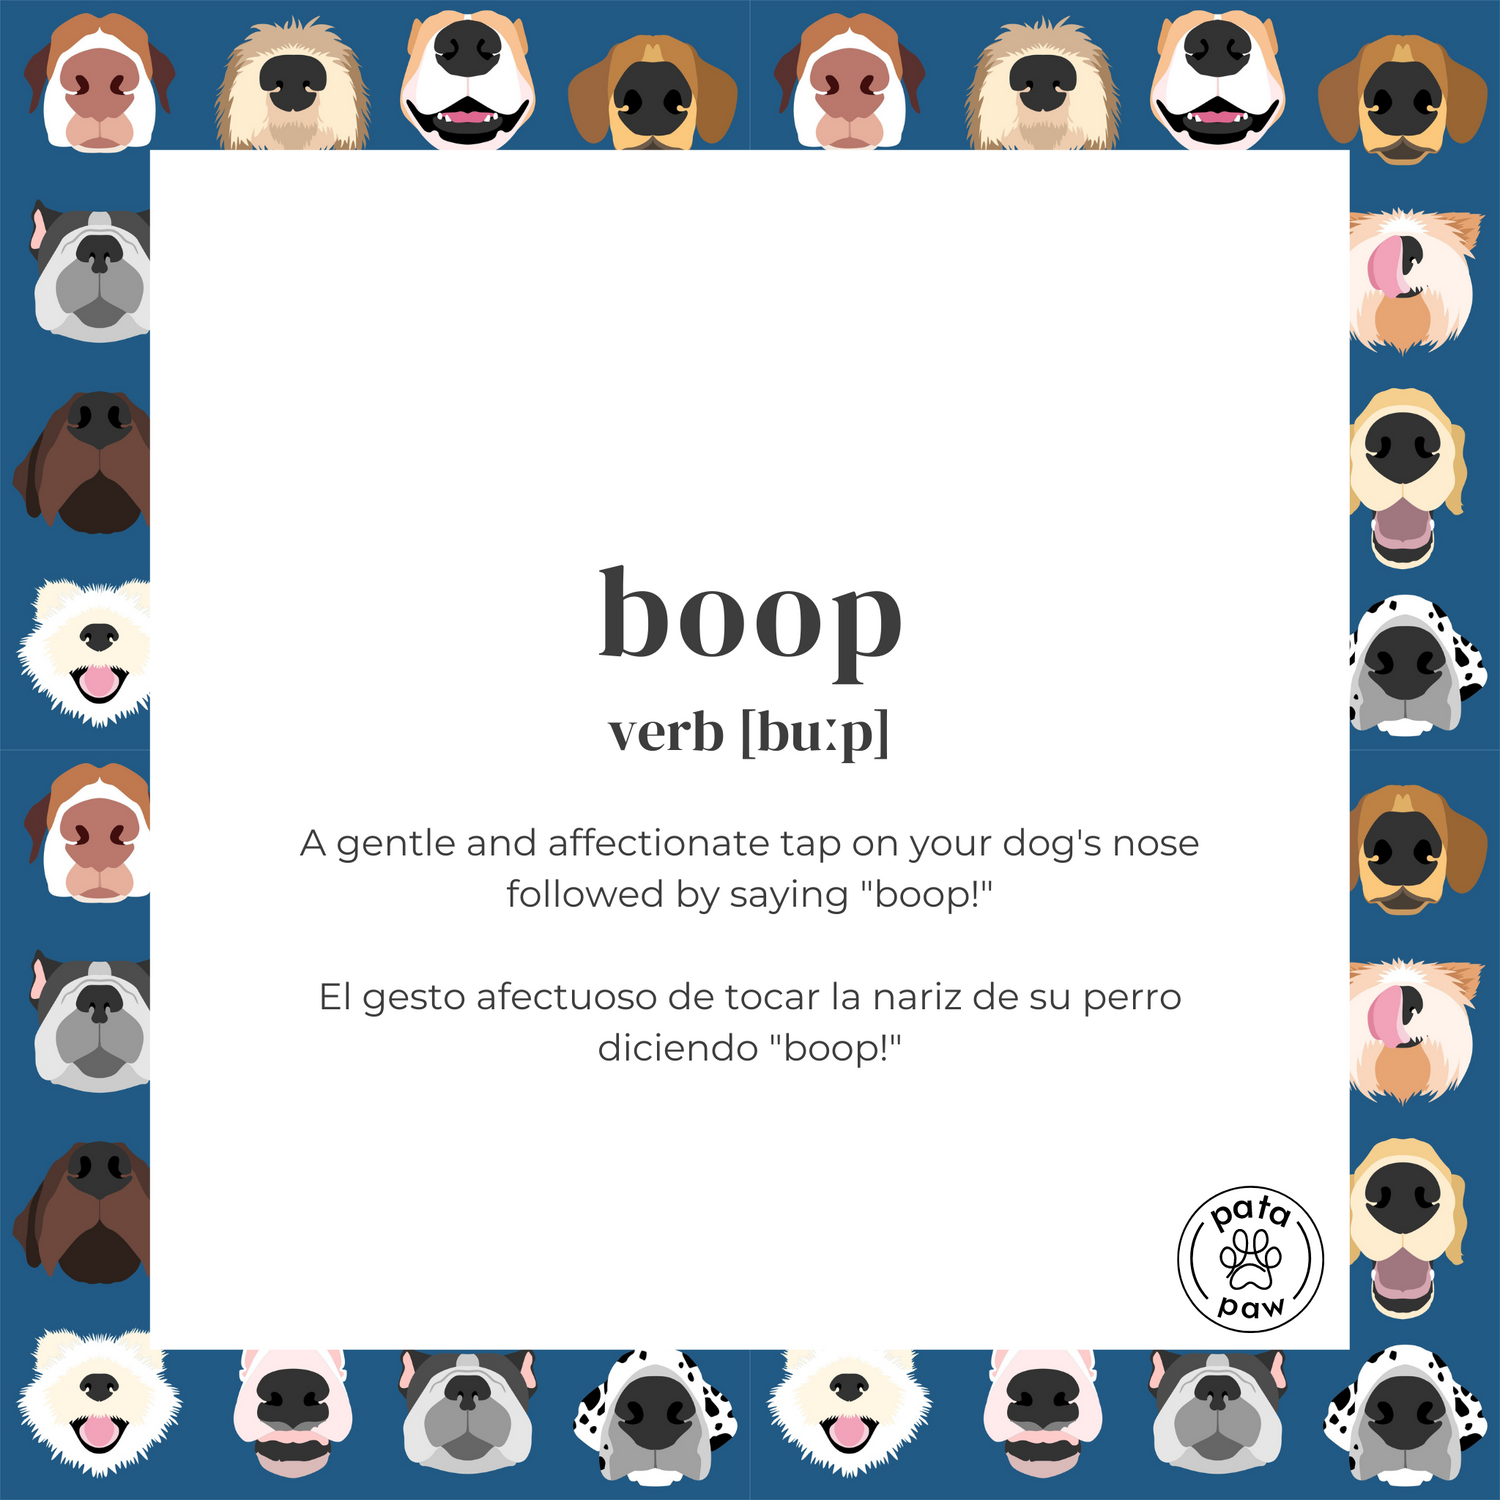 What is the meaning of "boop"? A gentle and affectionate tap on your dog's nose followed by saying "boop!"